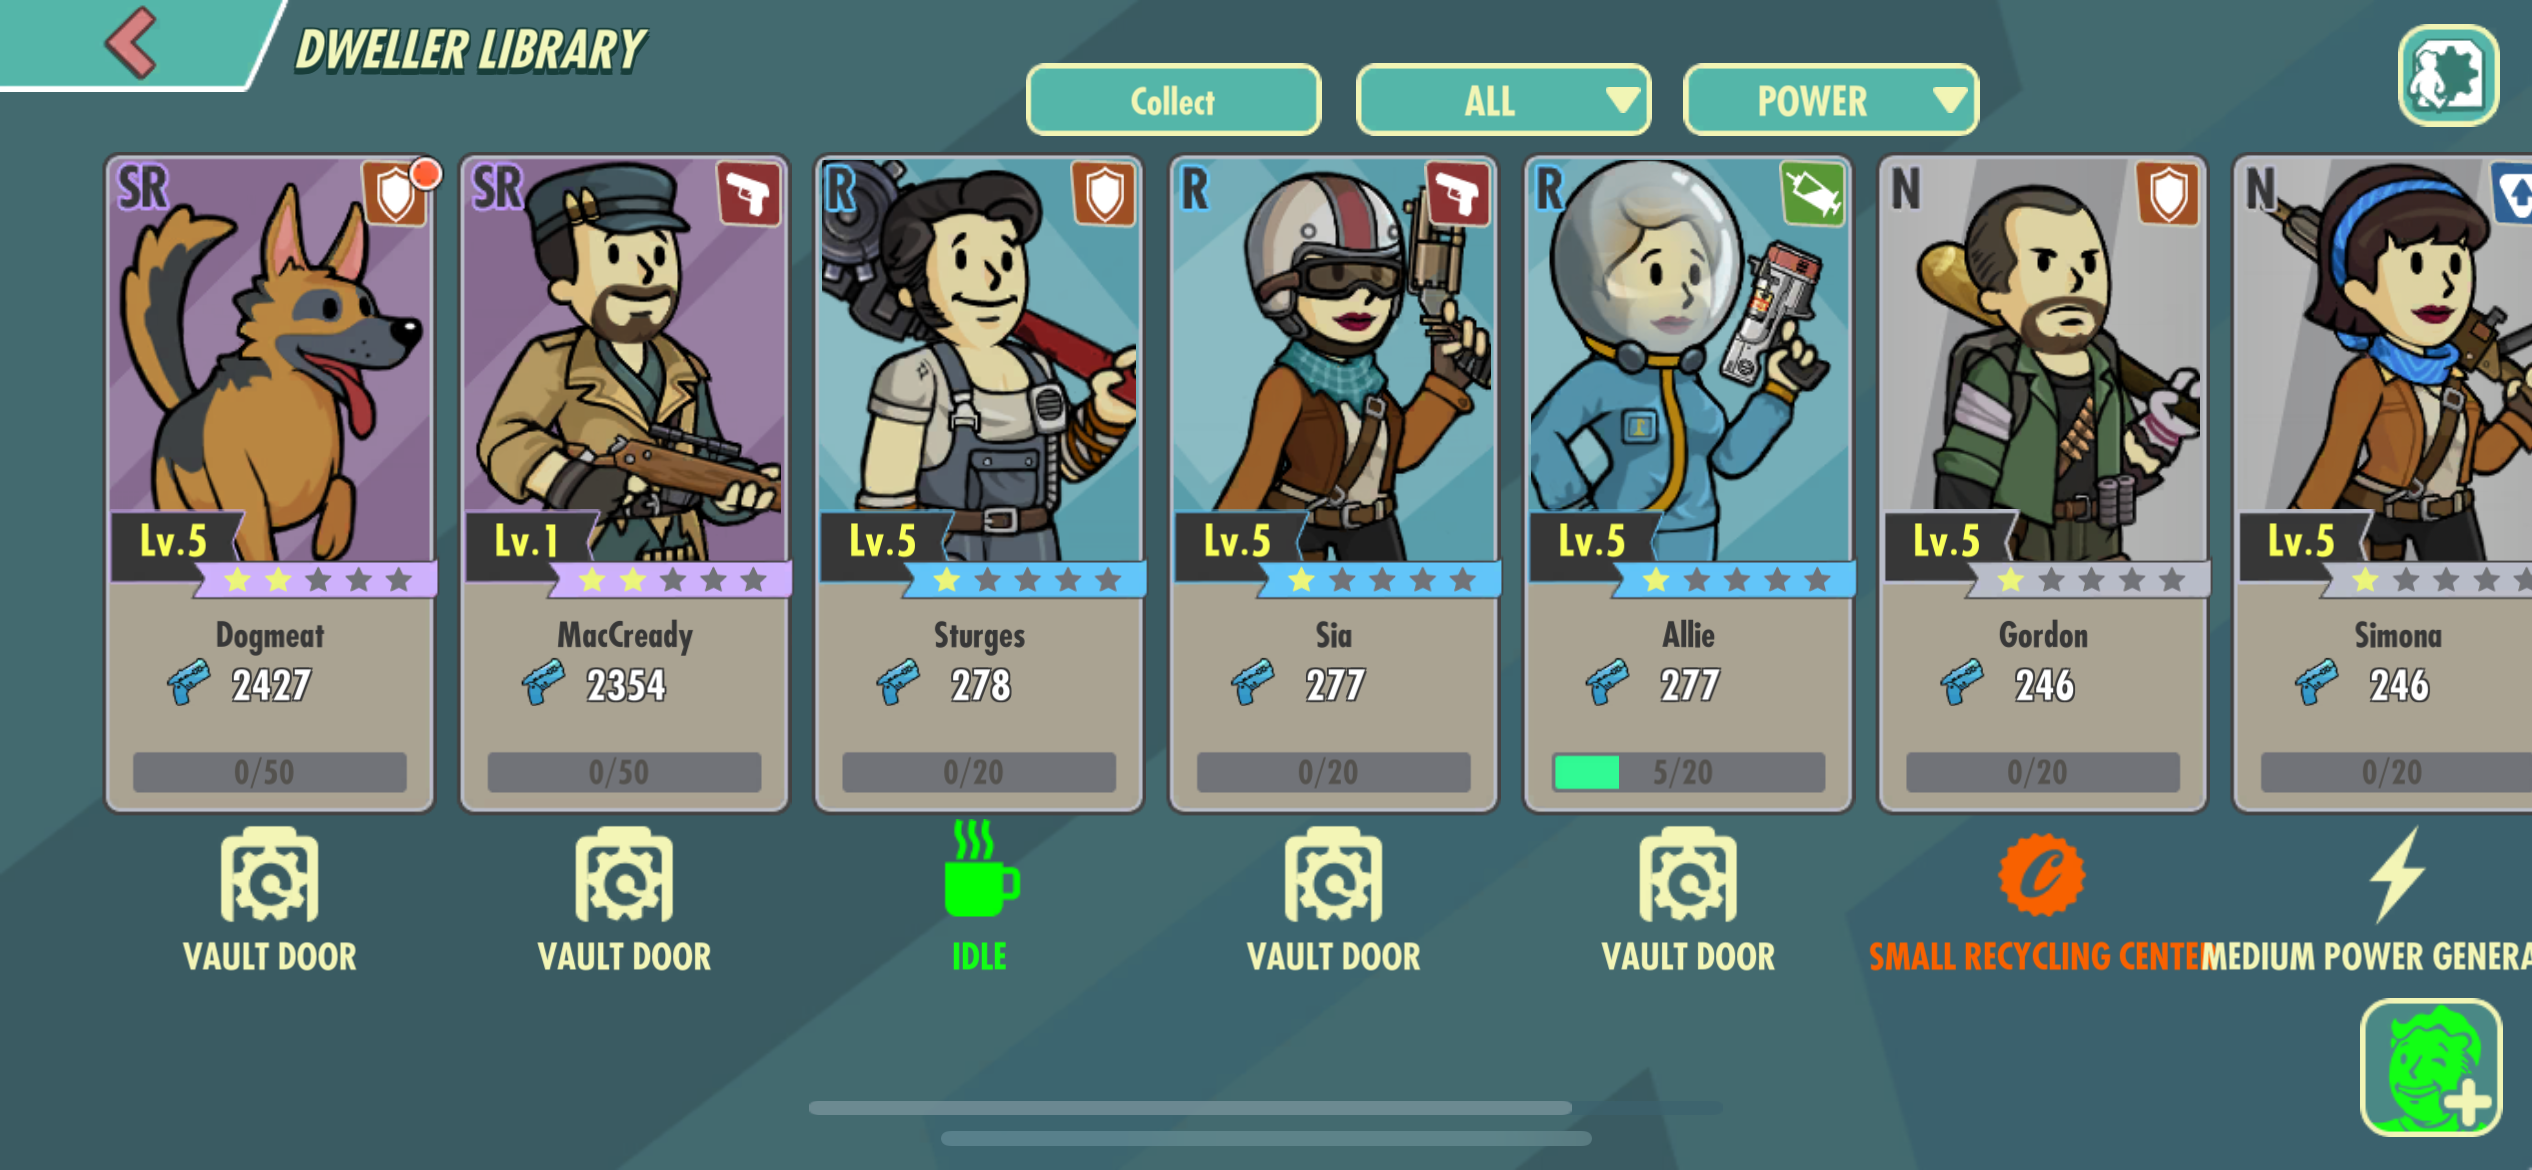 Fallout 4 shelter online фото 53